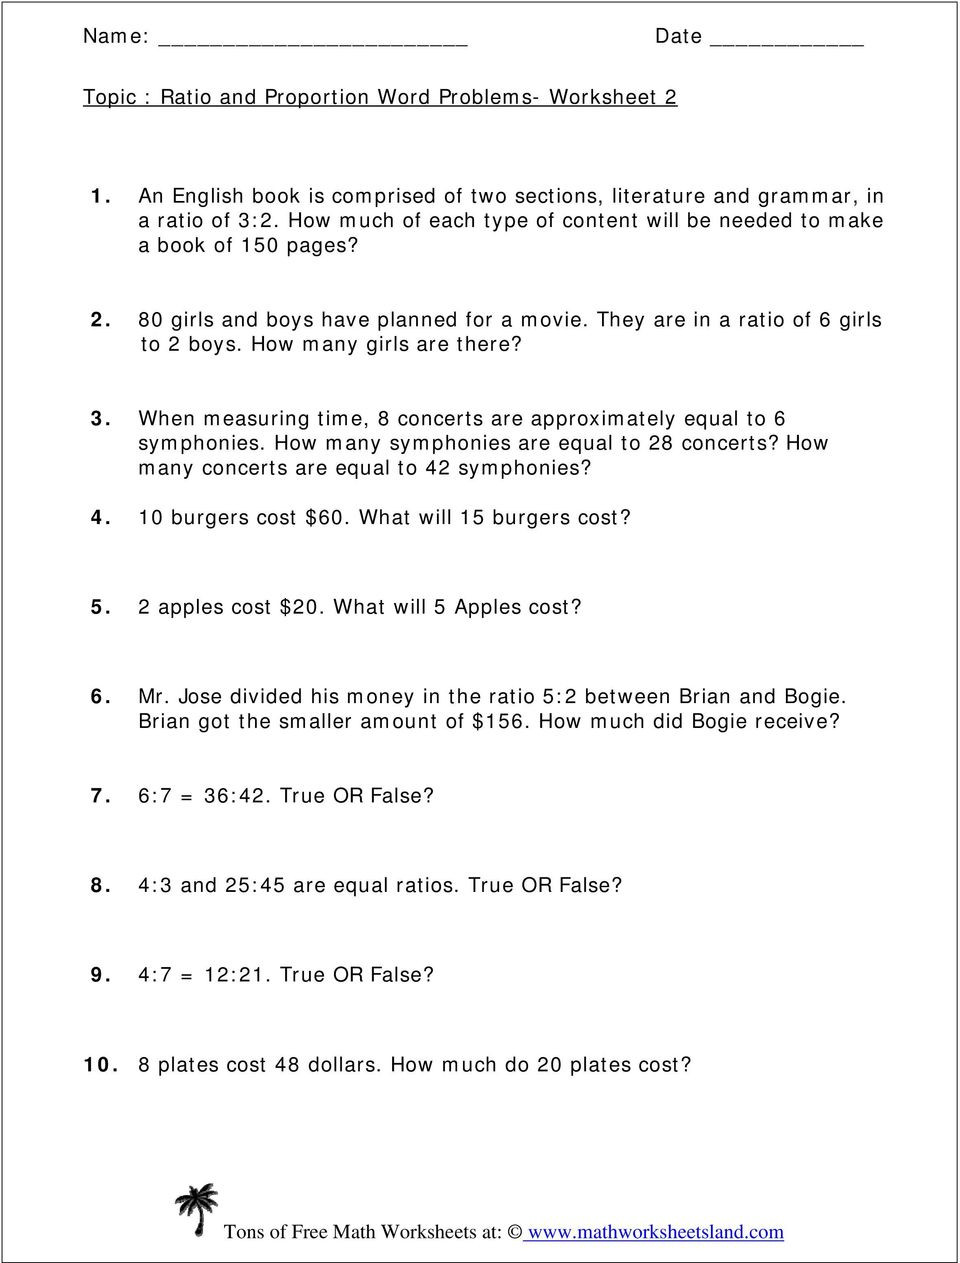 Ratio and Proportion Worksheet Pdf topic Ratio and Proportion Word Problems Worksheet Girls